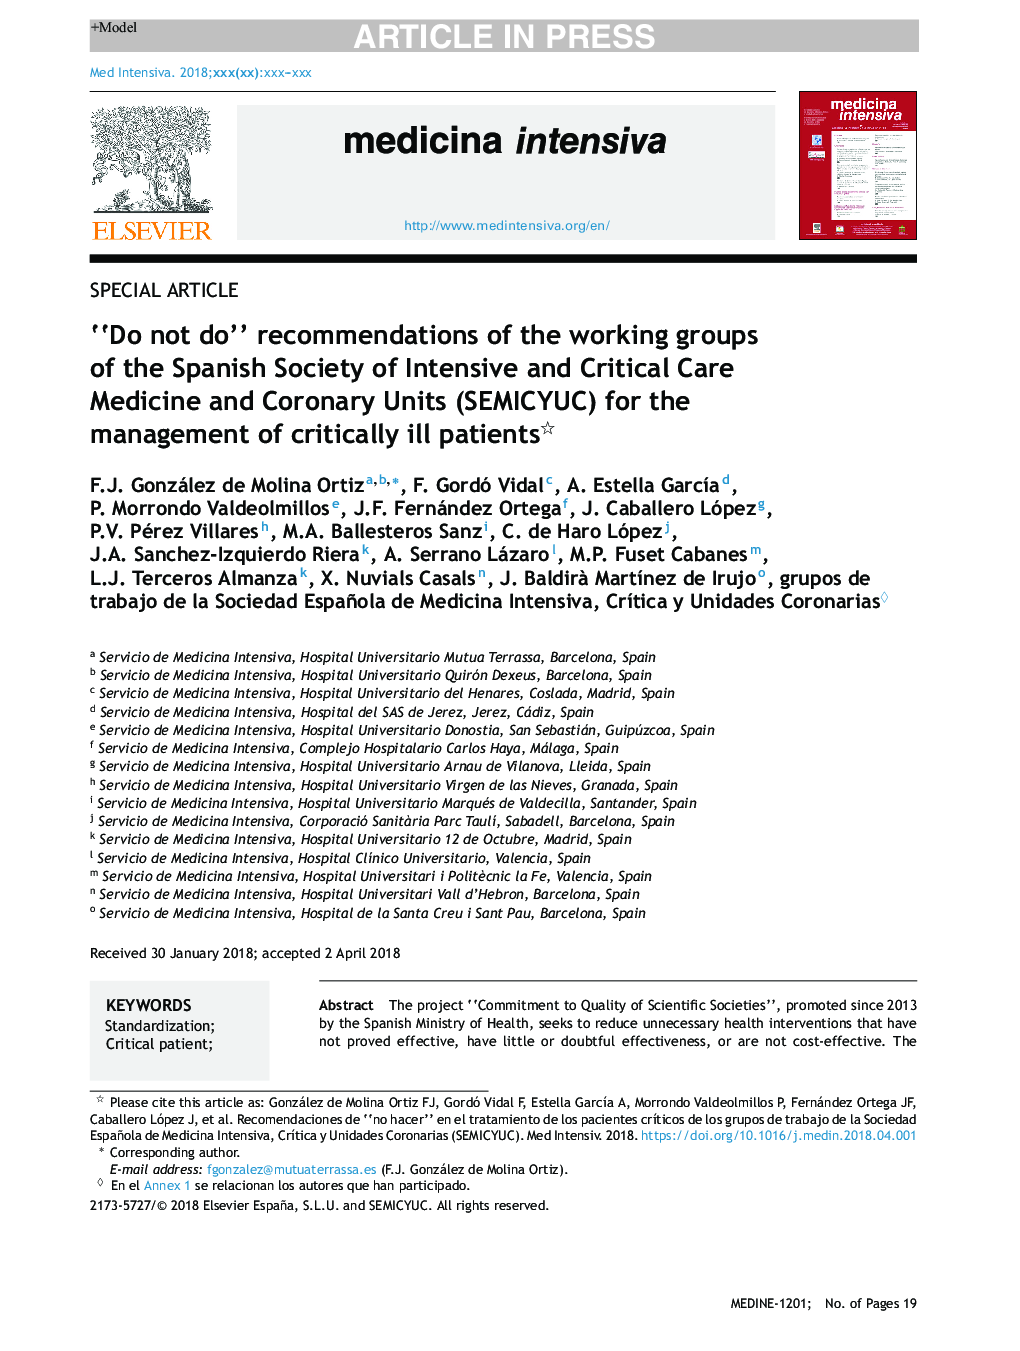 “Do not do” recommendations of the working groups of the Spanish Society of Intensive and Critical Care Medicine and Coronary Units (SEMICYUC) for the management of critically ill patients